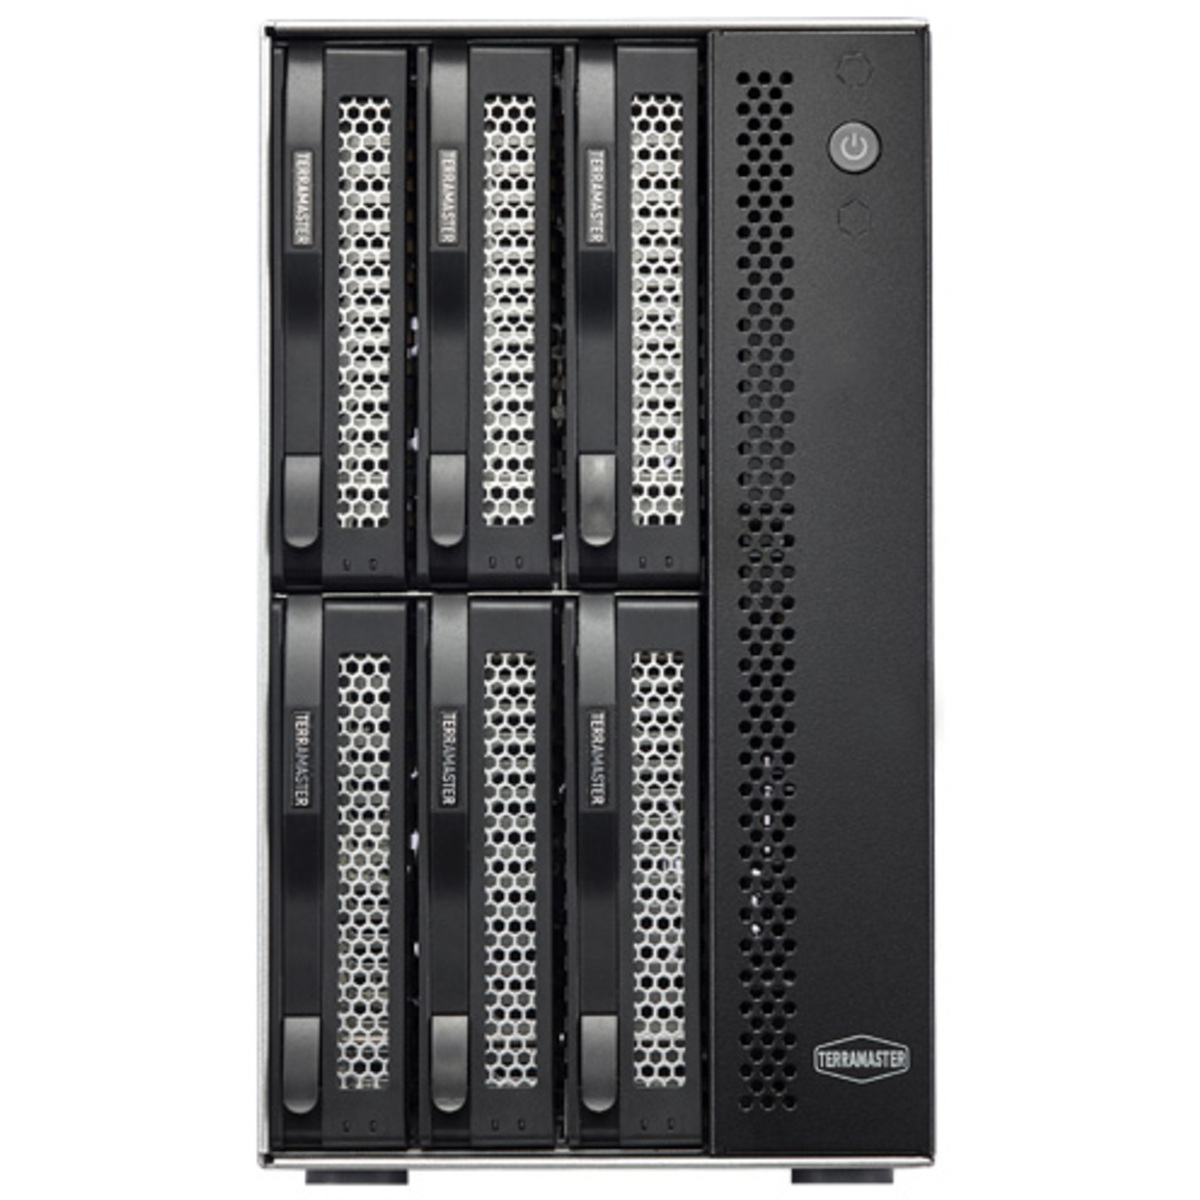 TerraMaster T6-423 96tb 6-Bay Desktop Multimedia / Power User / Business NAS - Network Attached Storage Device 4x24tb Seagate IronWolf Pro ST24000NT002 3.5 7200rpm SATA 6Gb/s HDD NAS Class Drives Installed - Burn-In Tested - FREE RAM UPGRADE T6-423